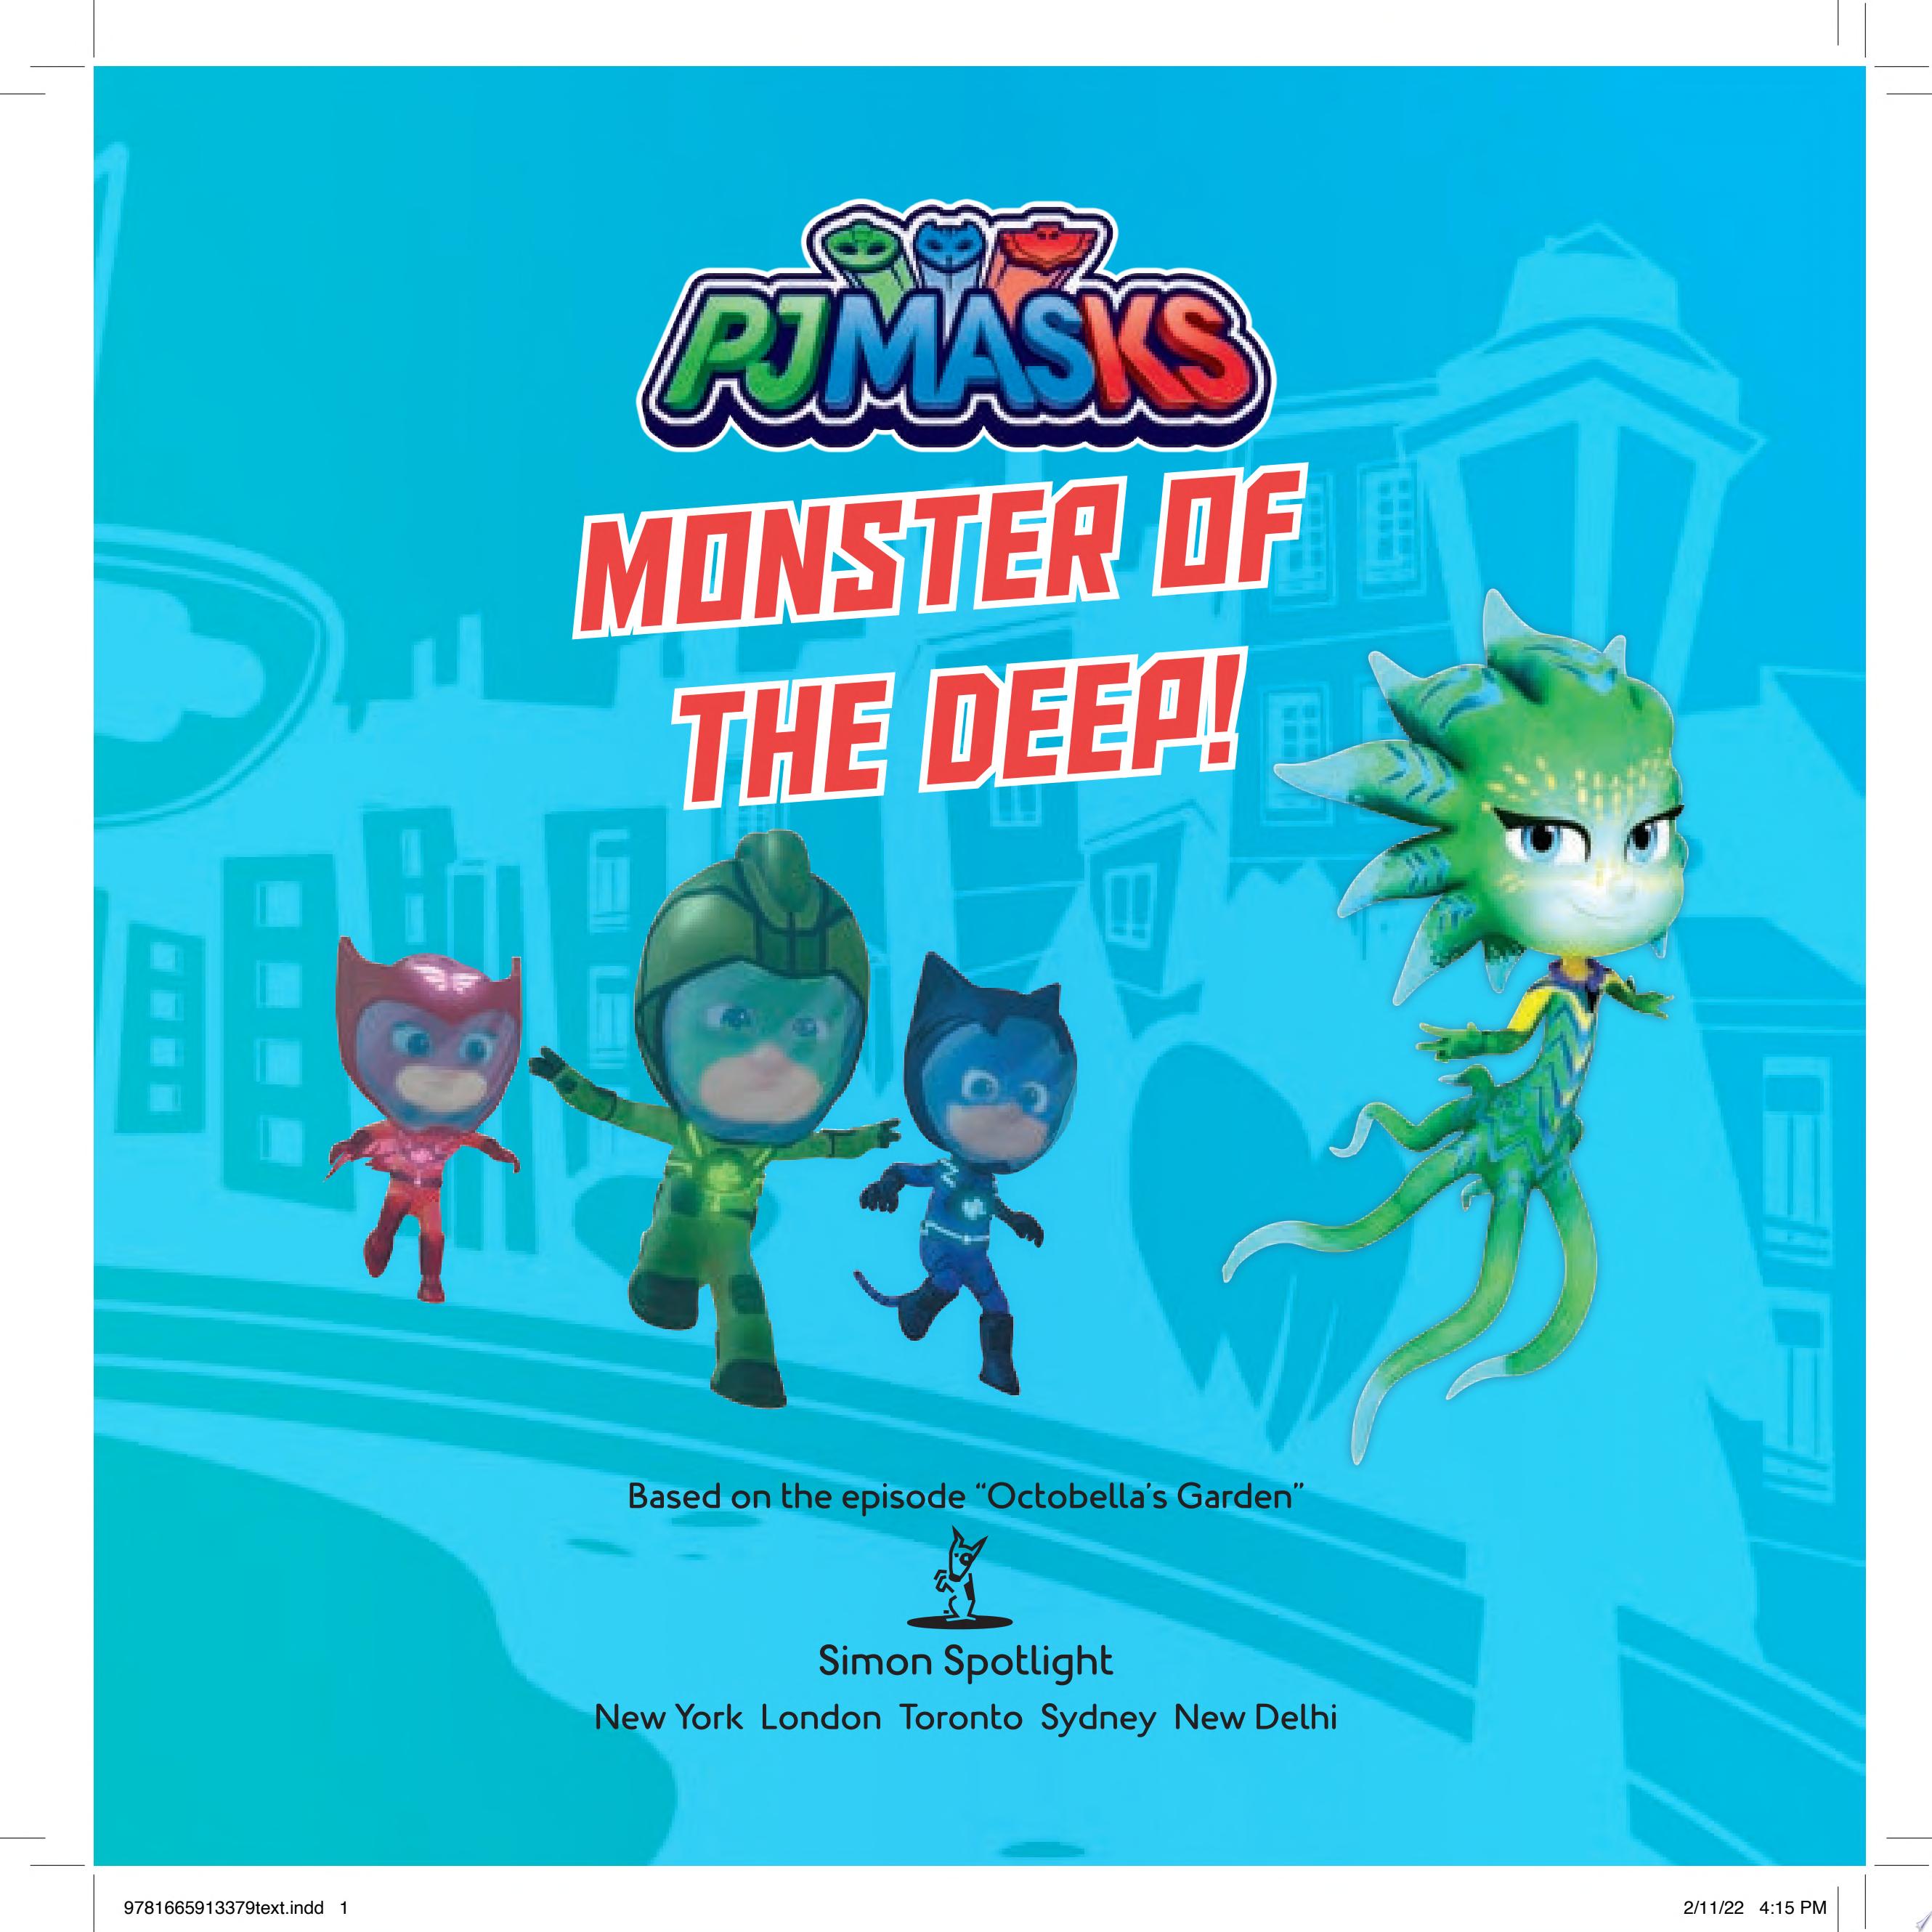 Image for "Monster of the Deep!"